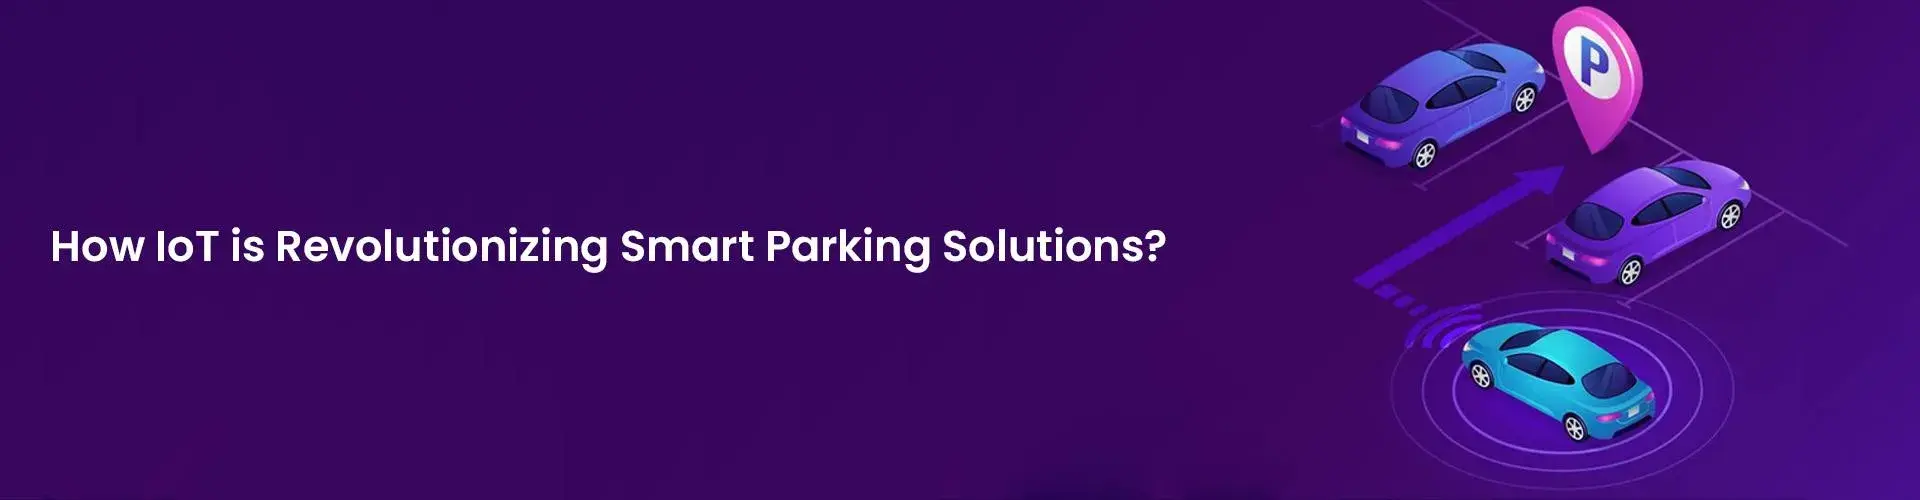 How IoT is Revolutionizing Smart Parking Solutions?